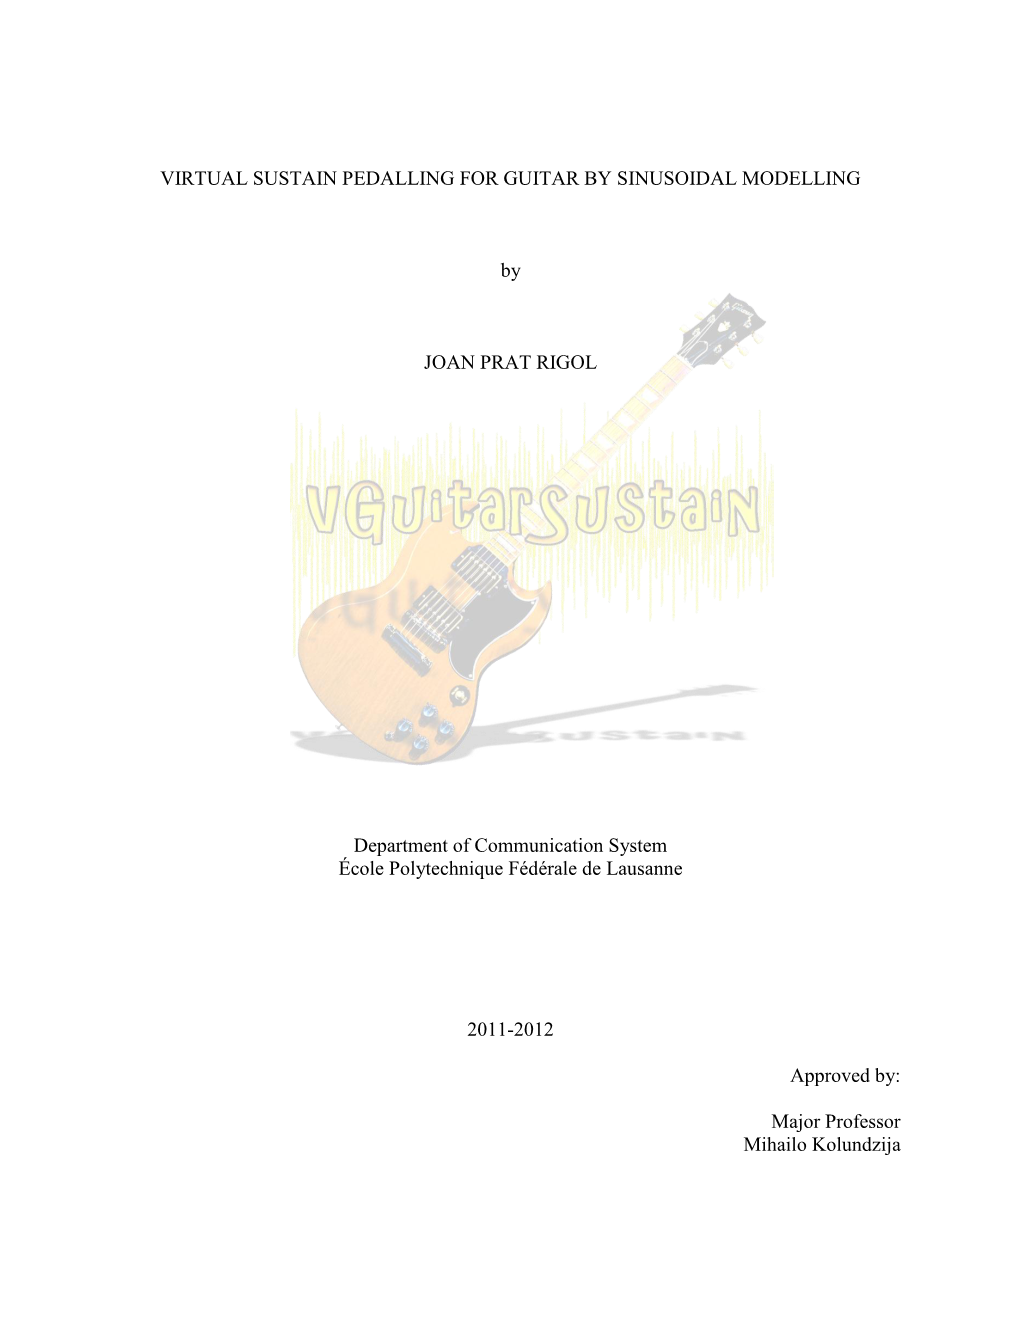 Virtual Sustain Pedalling for Guitar by Sinusoidal Modelling